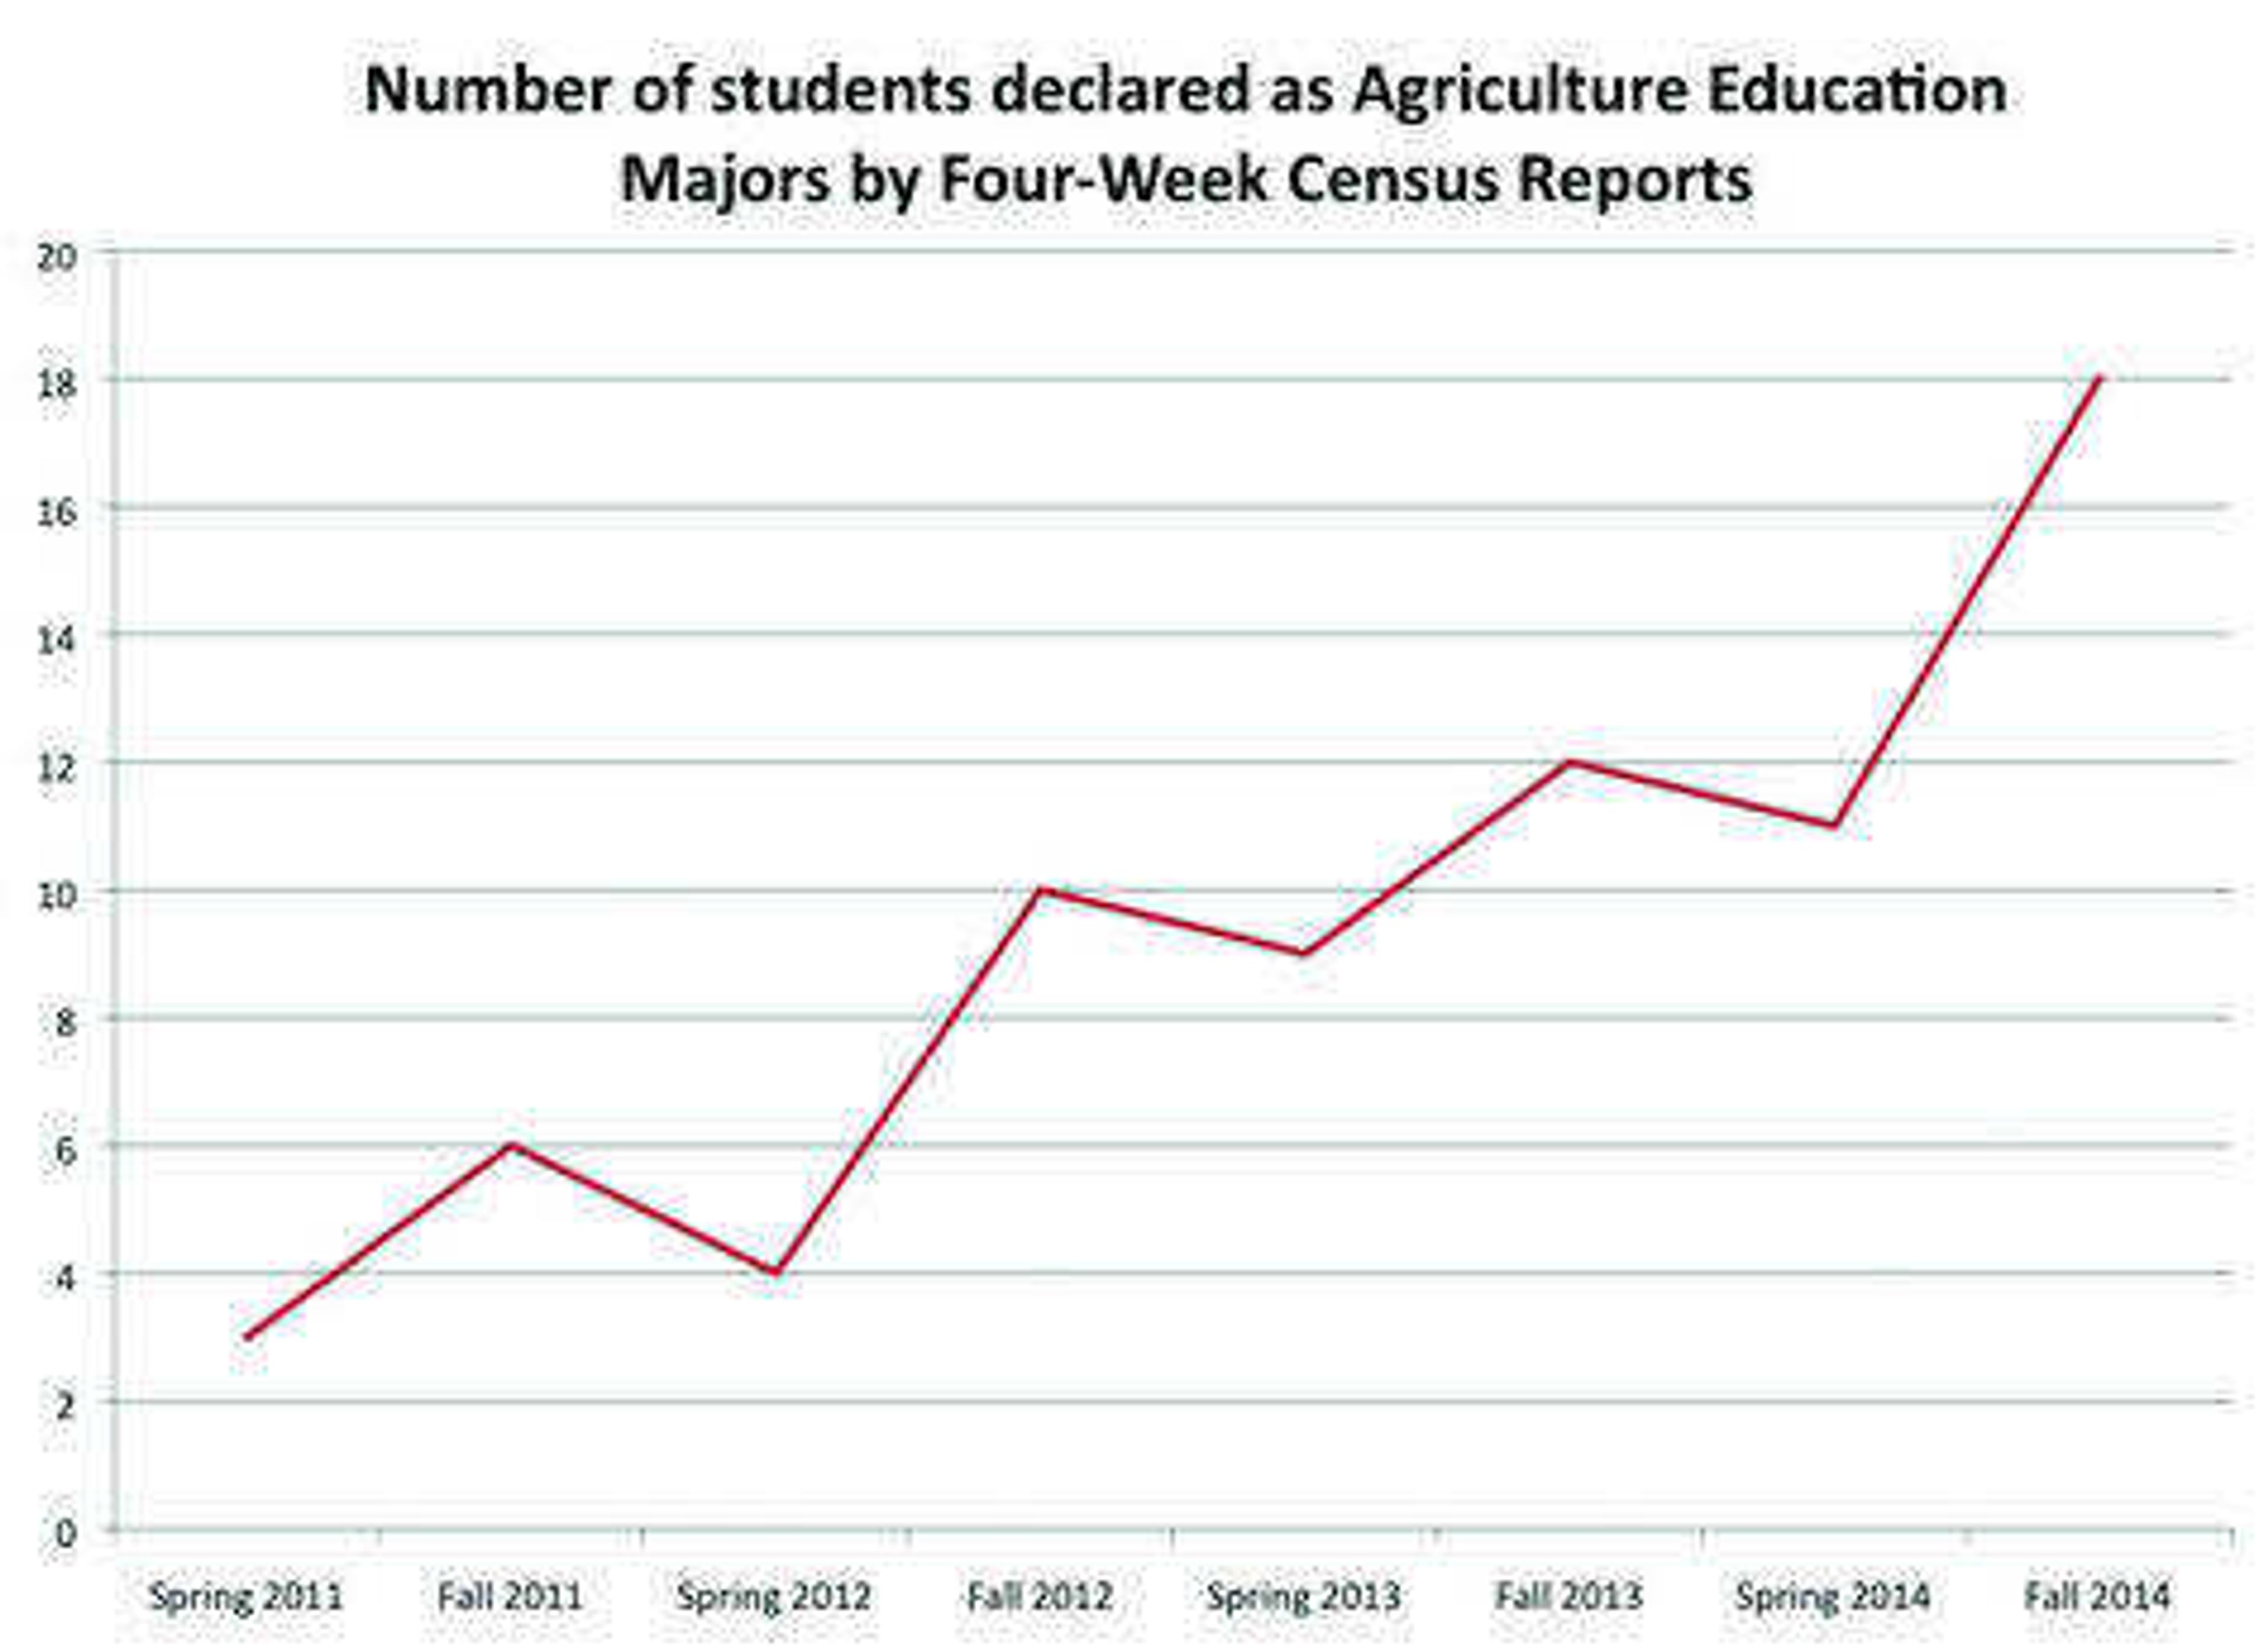 Agriculture Education major enrollment grew over past five years